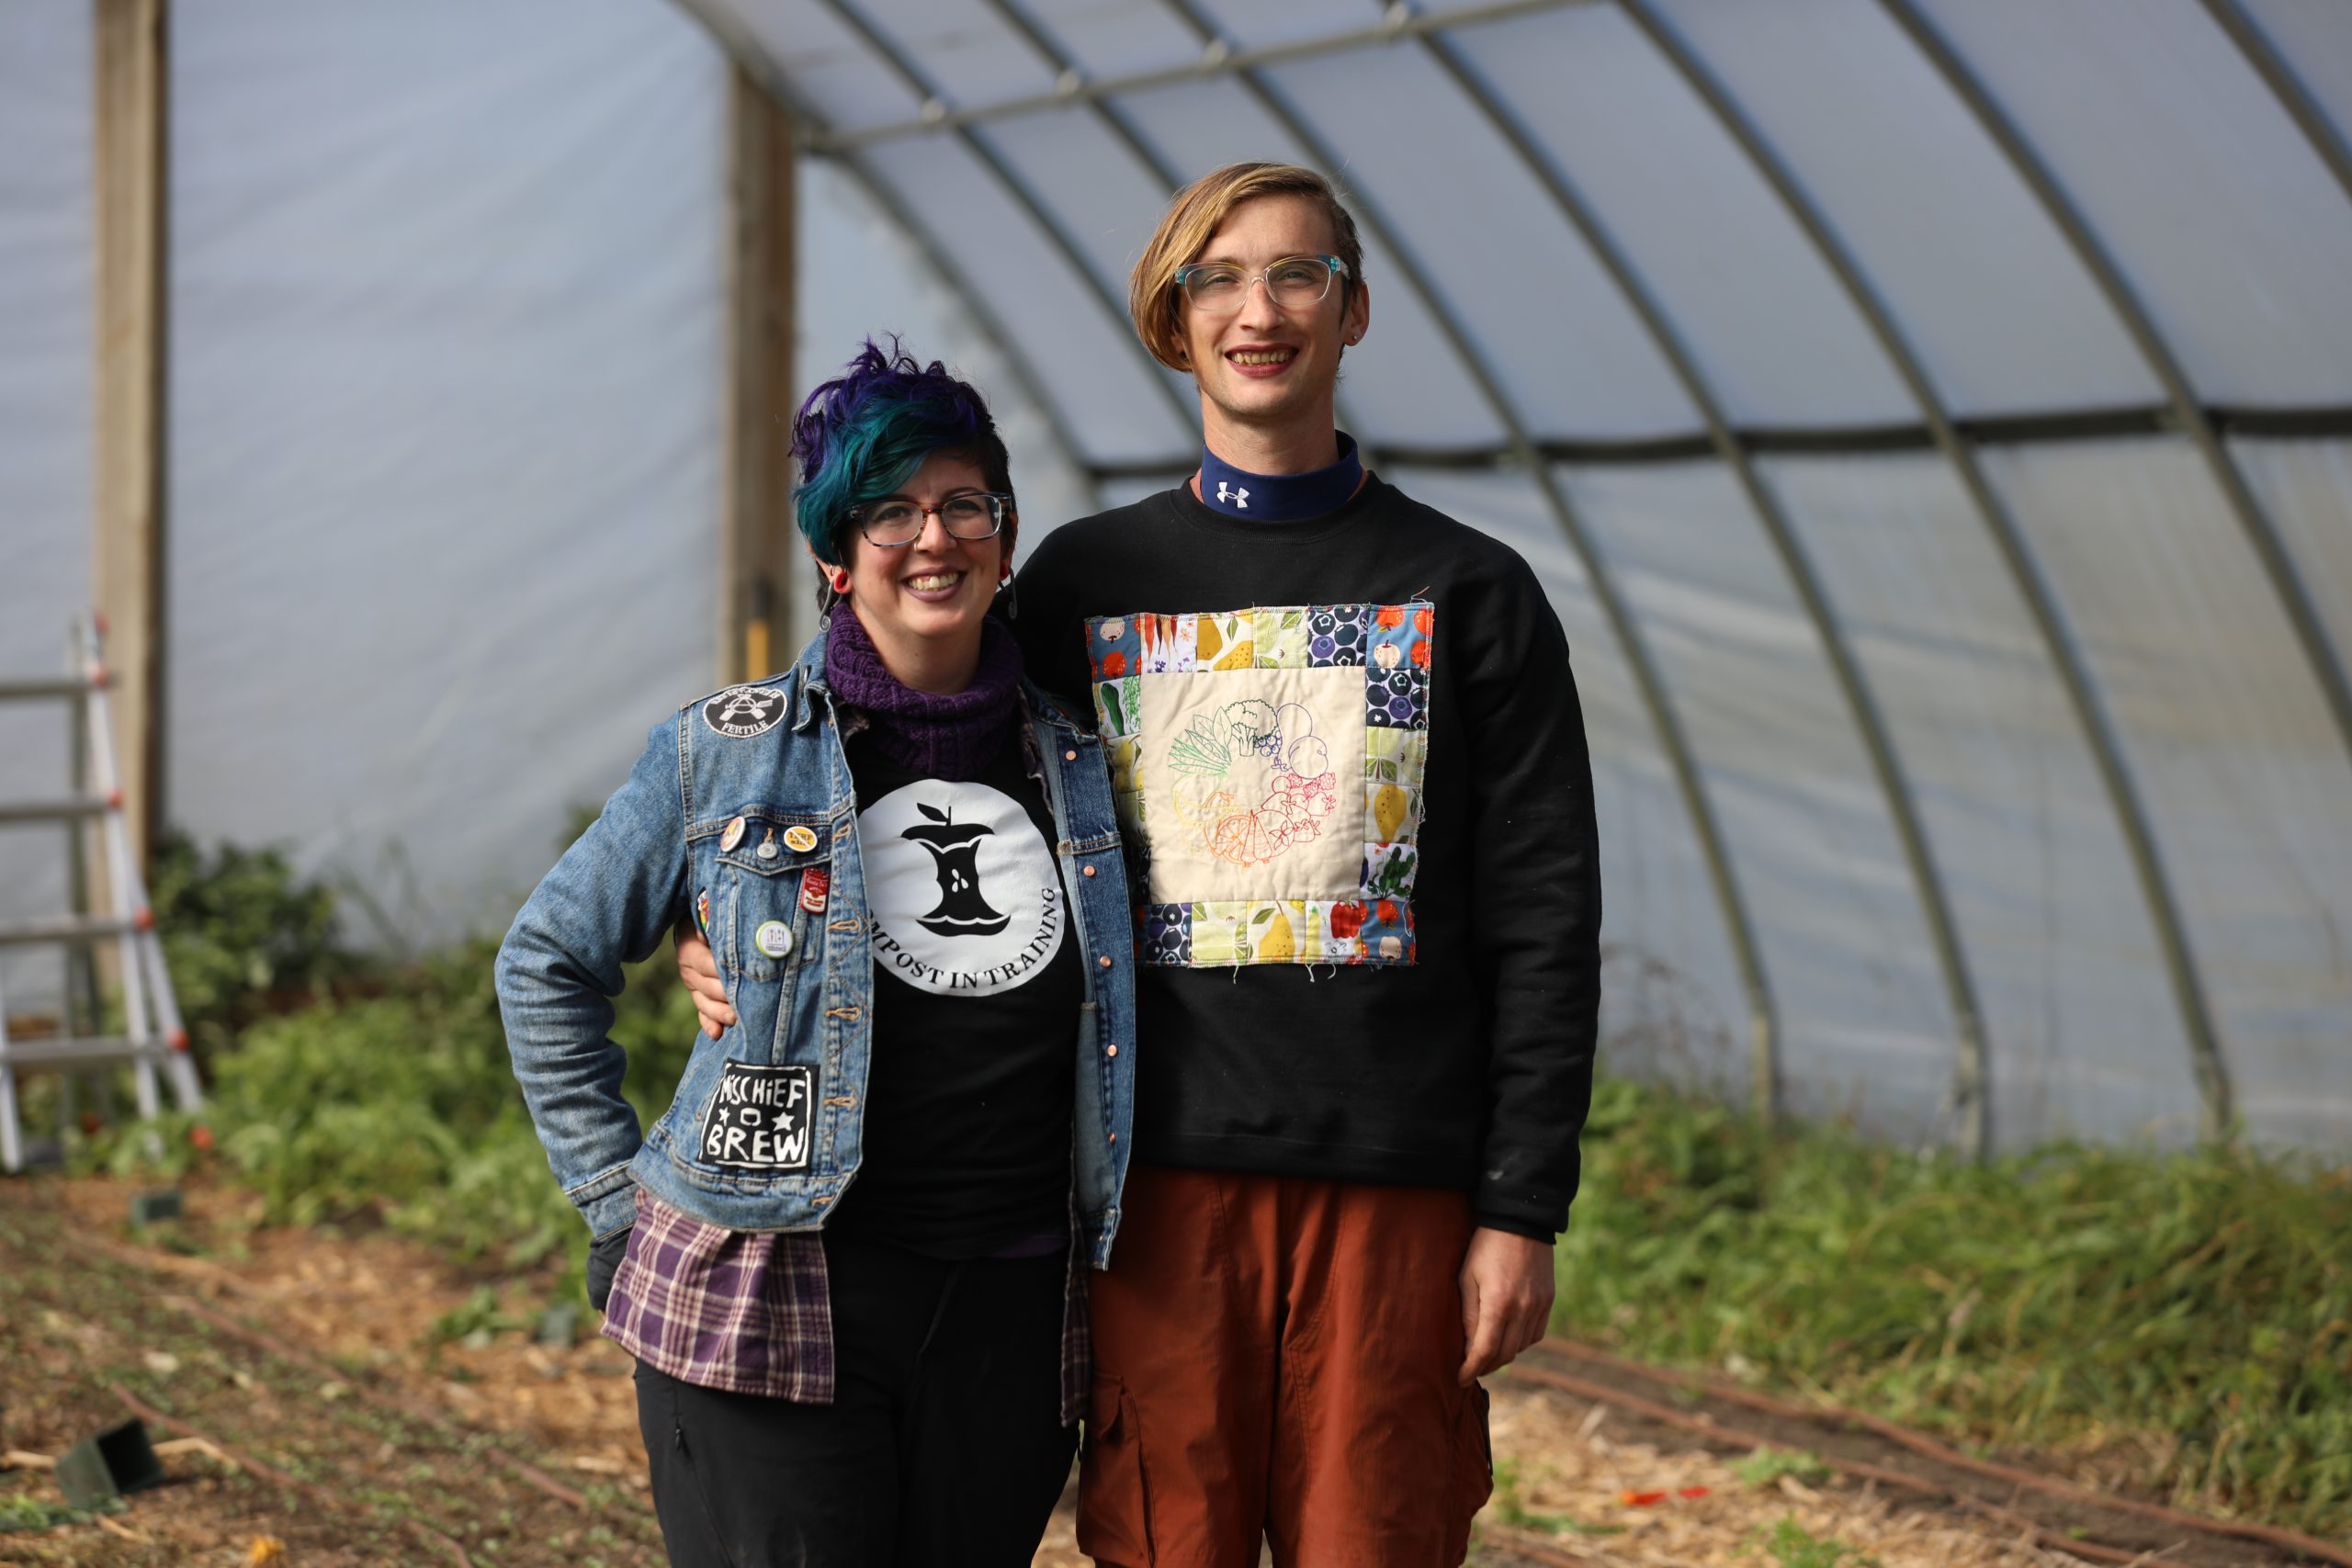 Queering the family farm Despite obstacles, LGBTQ farmers find fertile ground in Midwest